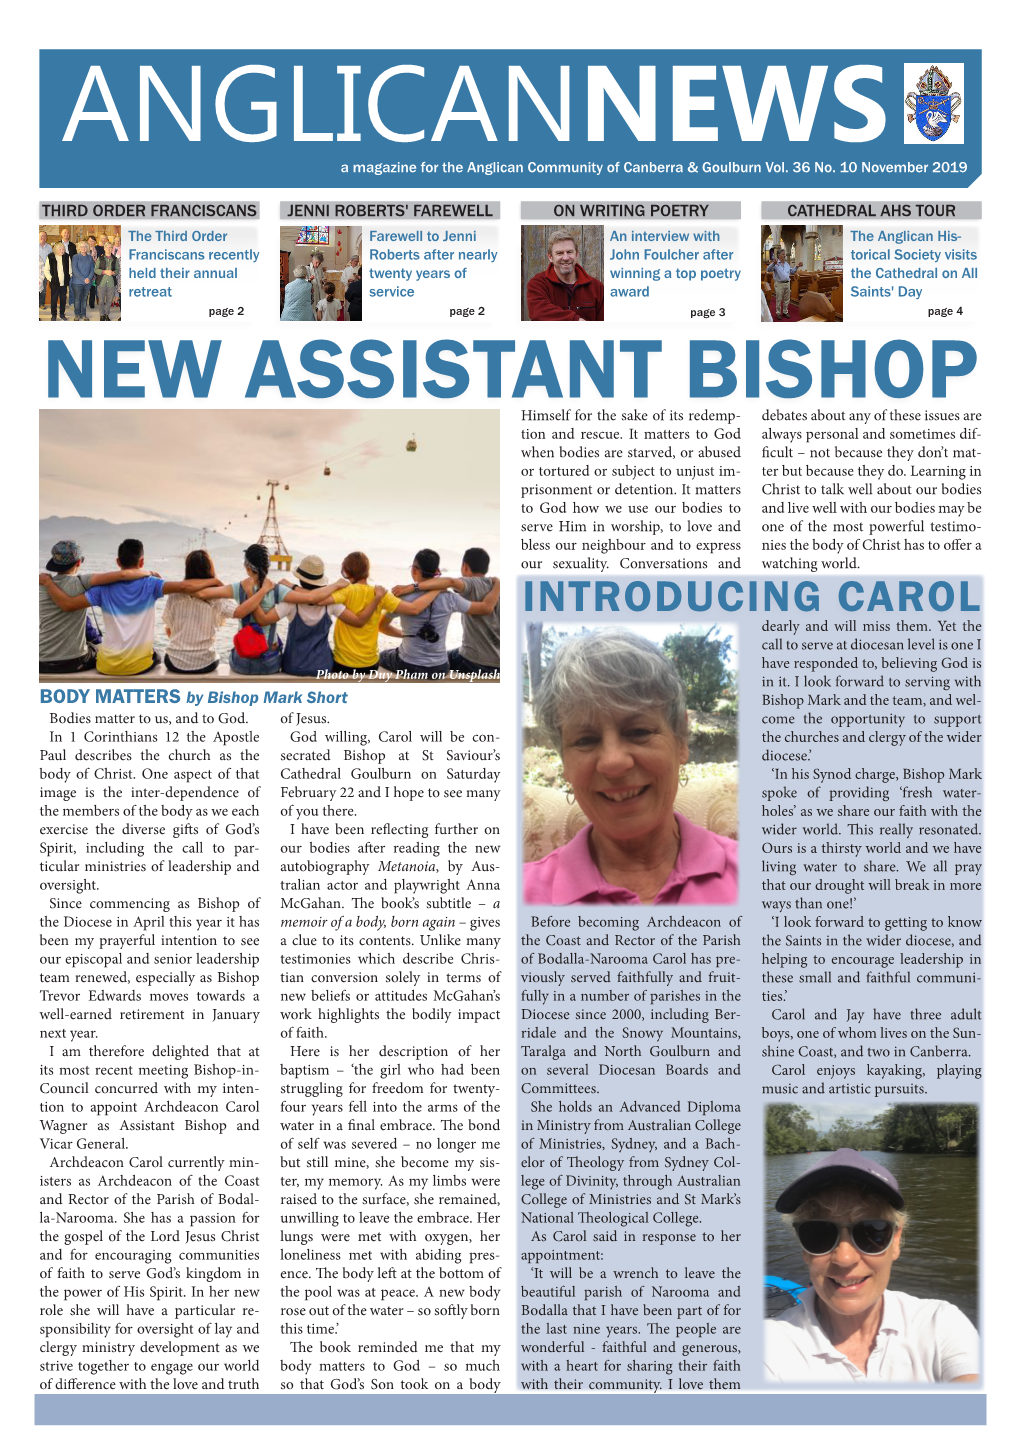 ANGLICANNEWS a Magazine for the Anglican Community of Canberra & Goulburn Vol